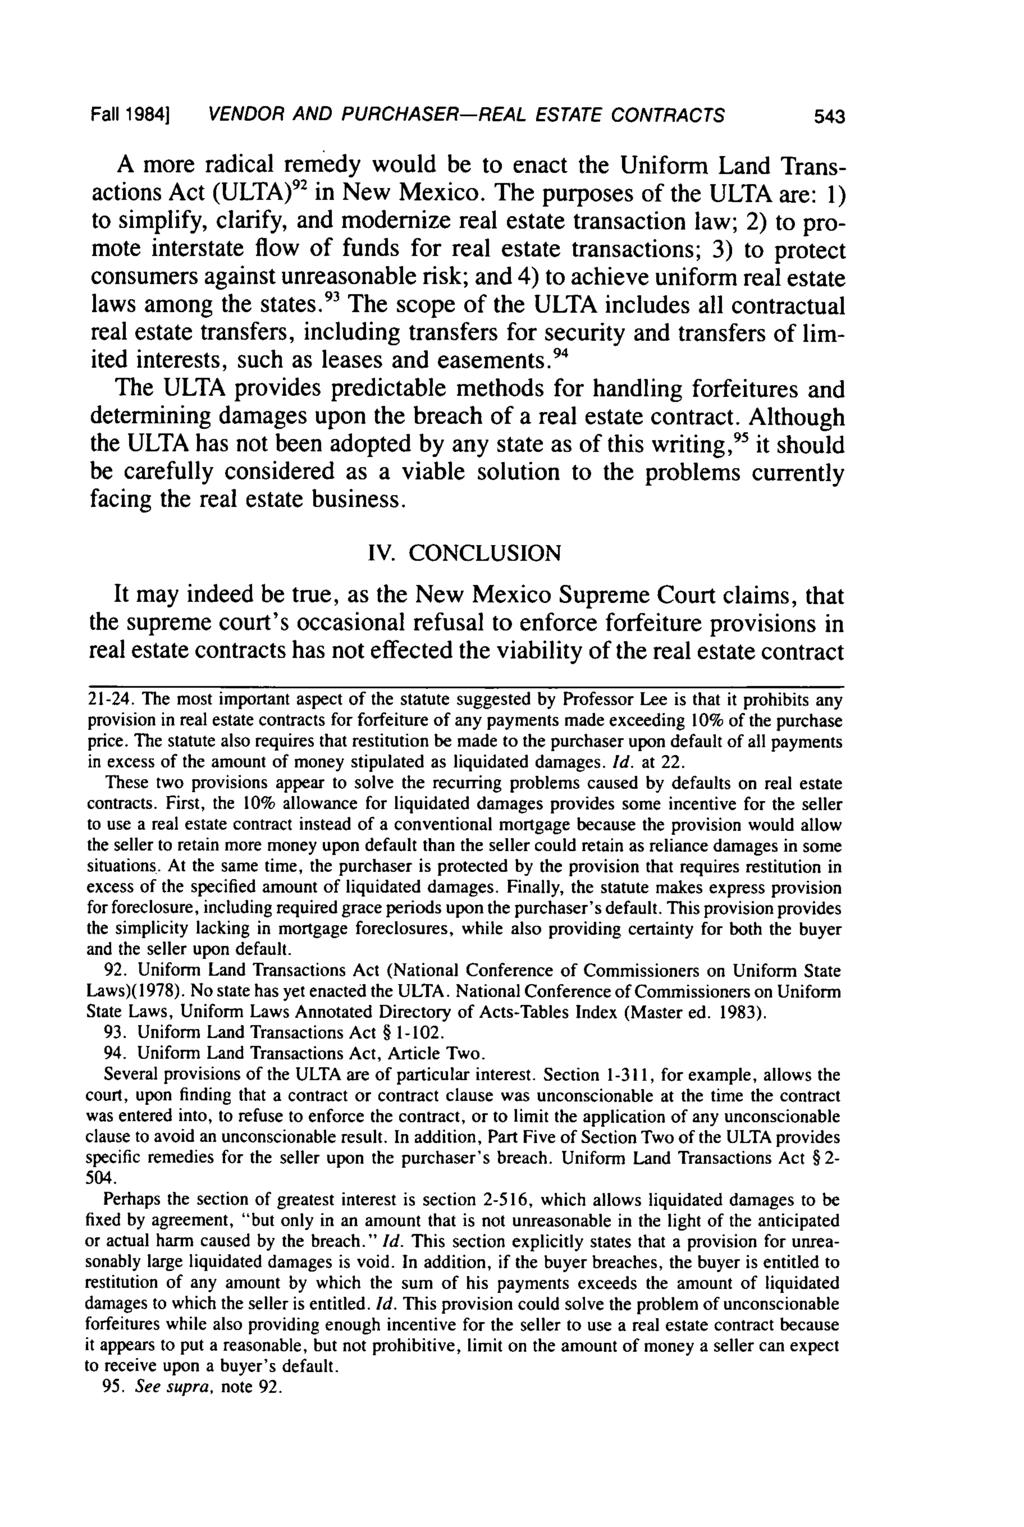 Fall 1984] VENDOR AND PURCHASER-REAL ESTATE CONTRACTS 543 A more radical remedy would be to enact the Uniform Land Transactions Act (ULTA) 92 in New Mexico.